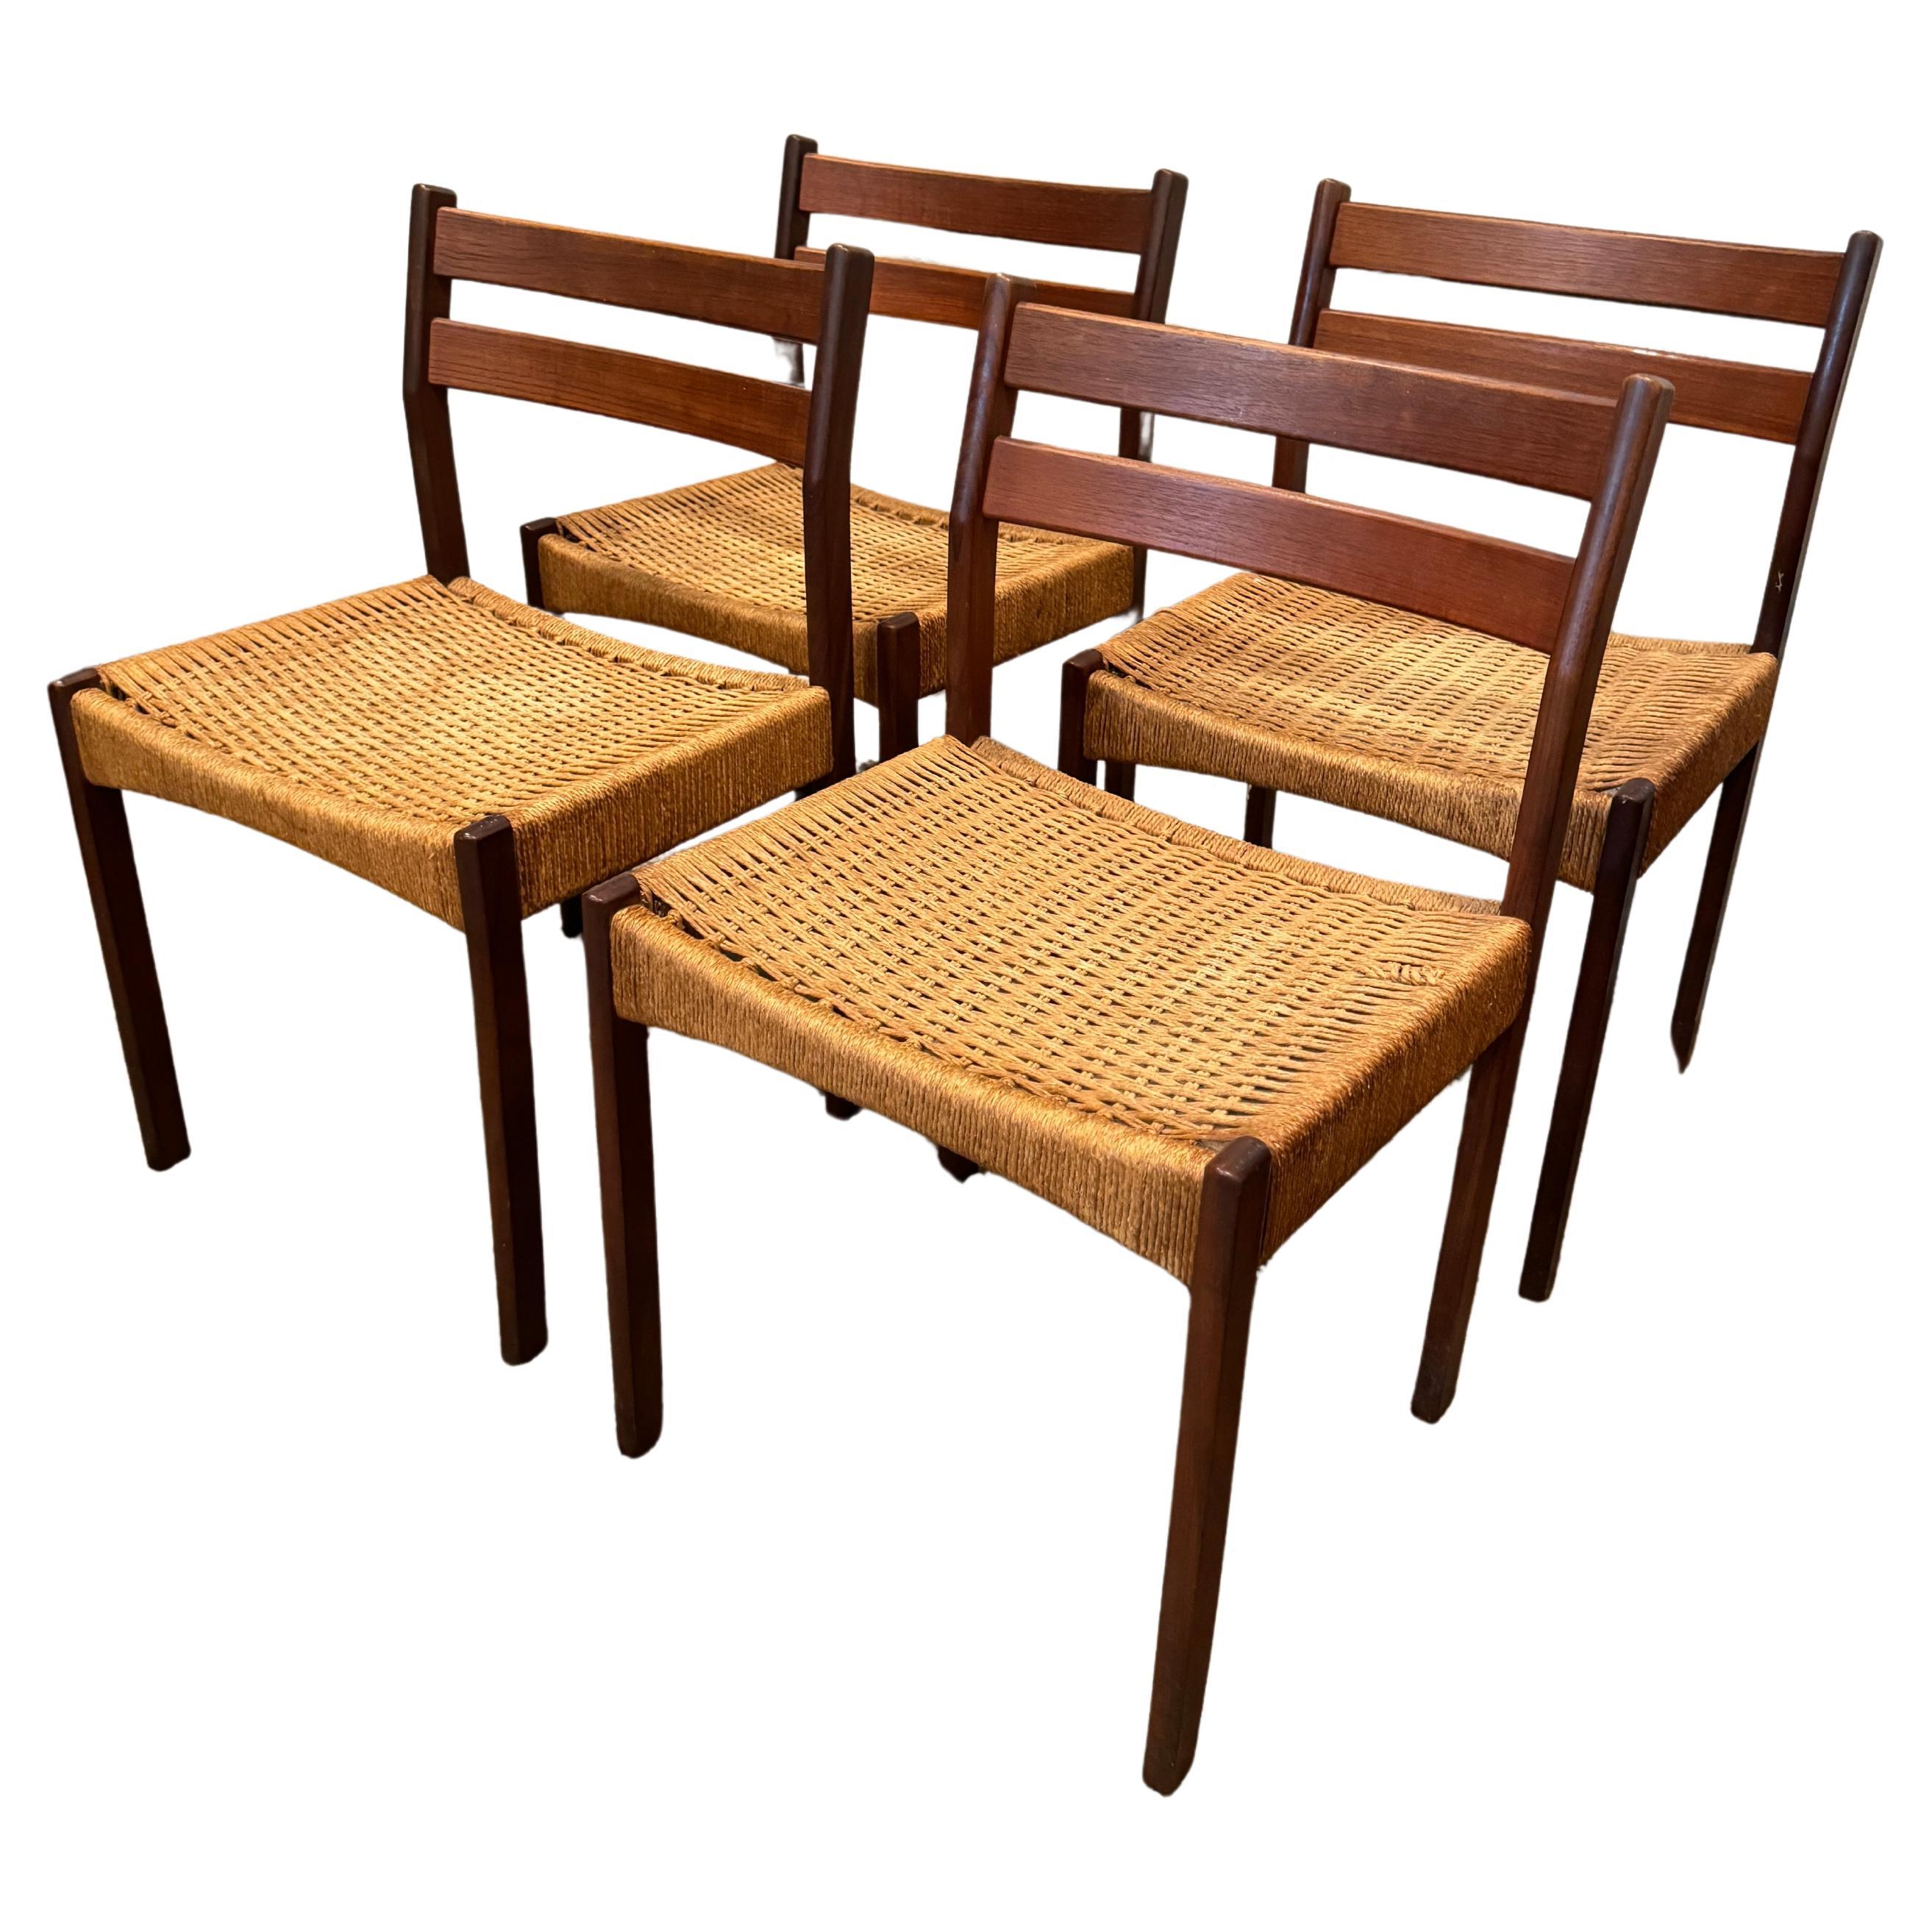 a set of 4 dining chairs designed by Arne Hovmand Olsen, produced by Mogens Kold